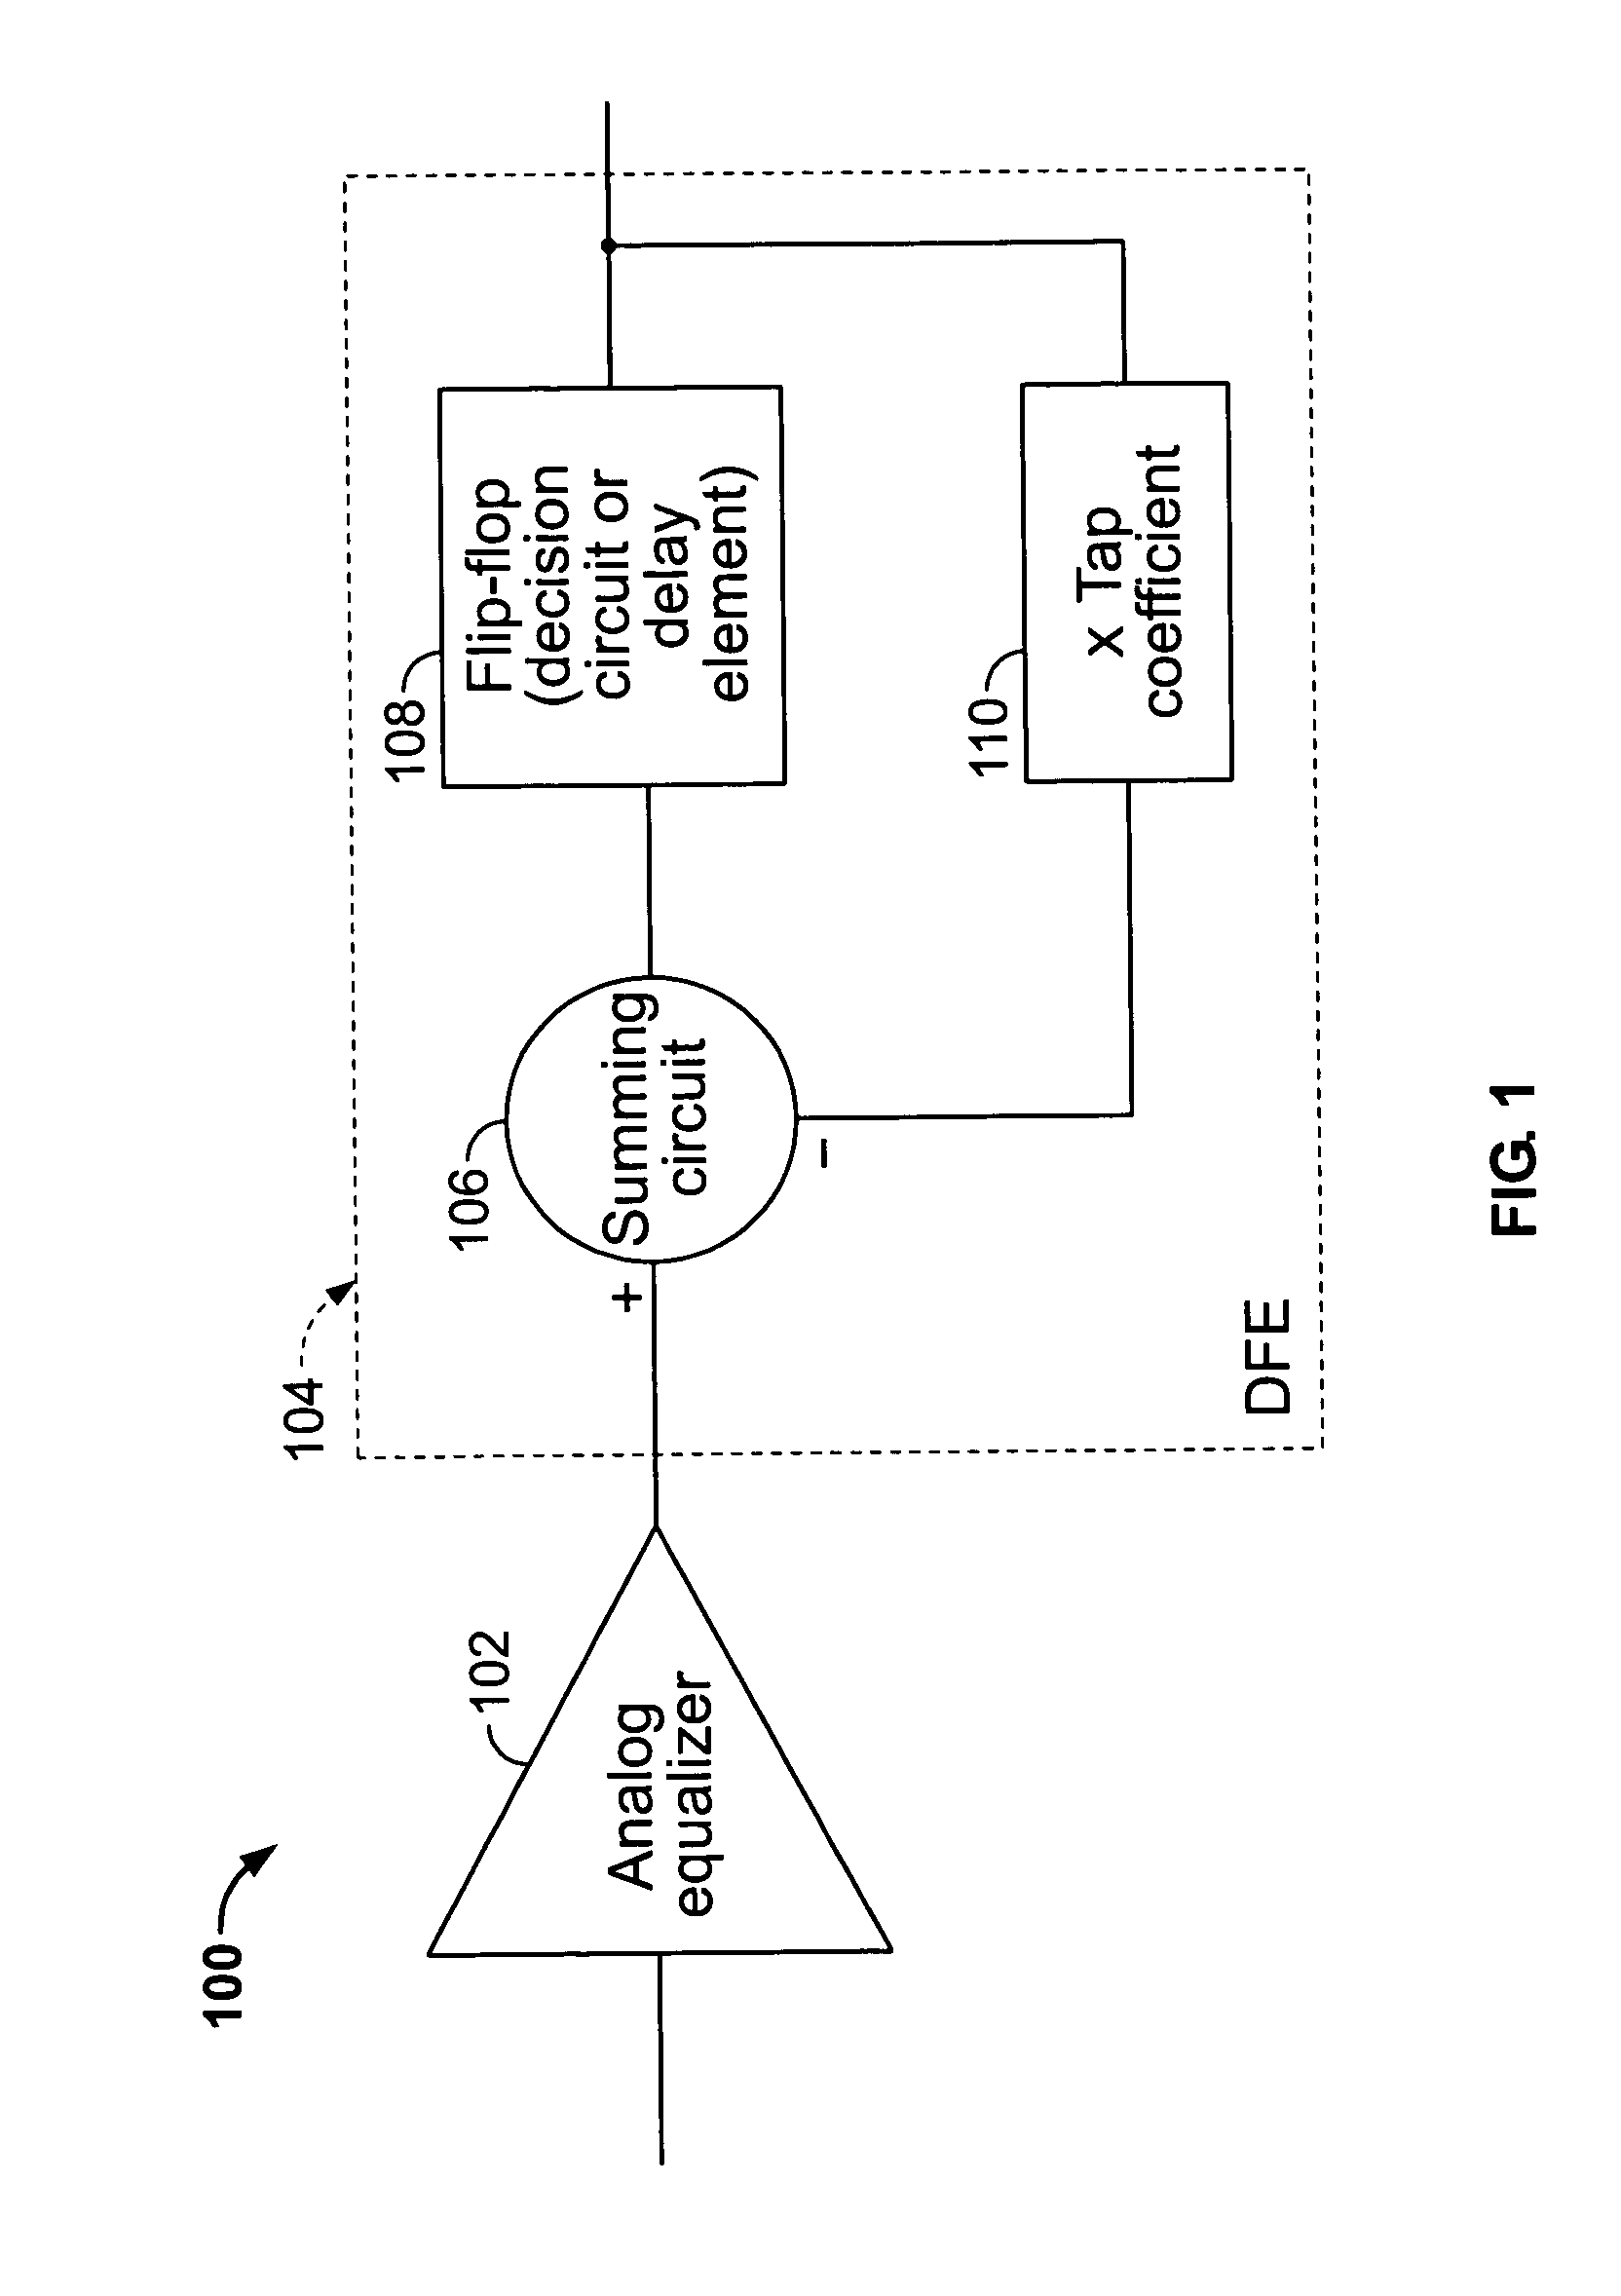 Methods and apparatus for equalization in high-speed backplane data communication